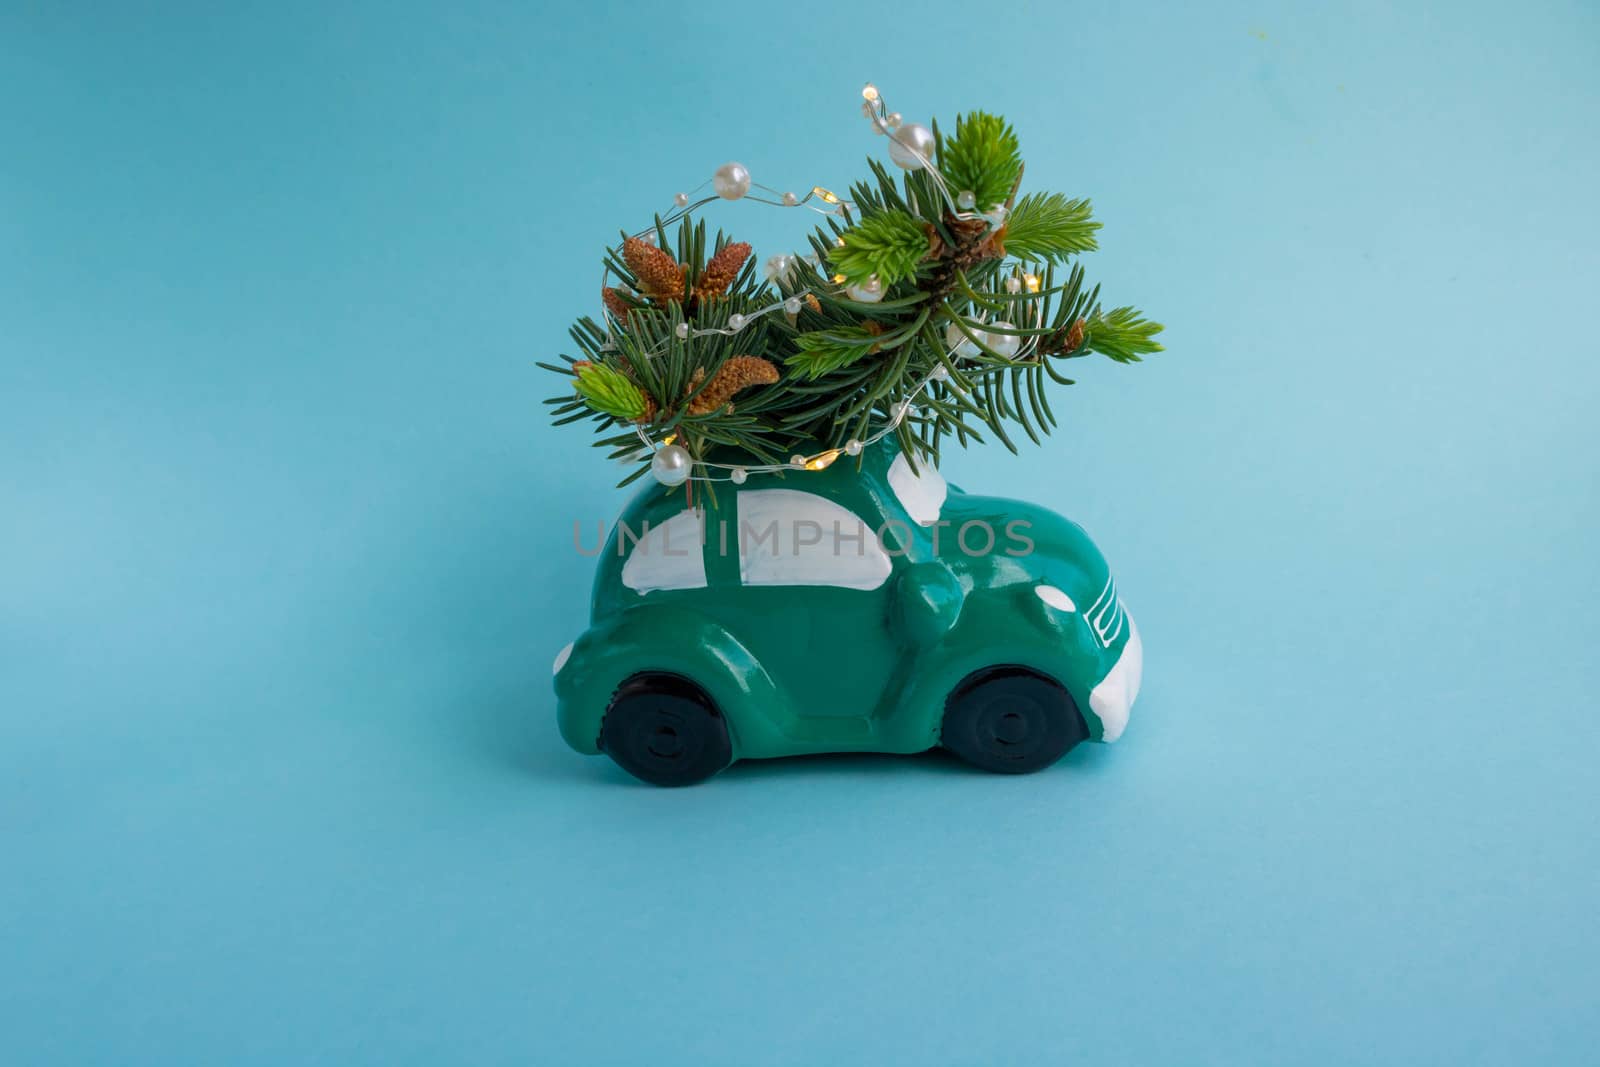 Green toy car-piggy Bank, carrying a Christmas tree on the roof with a garland on a blue background